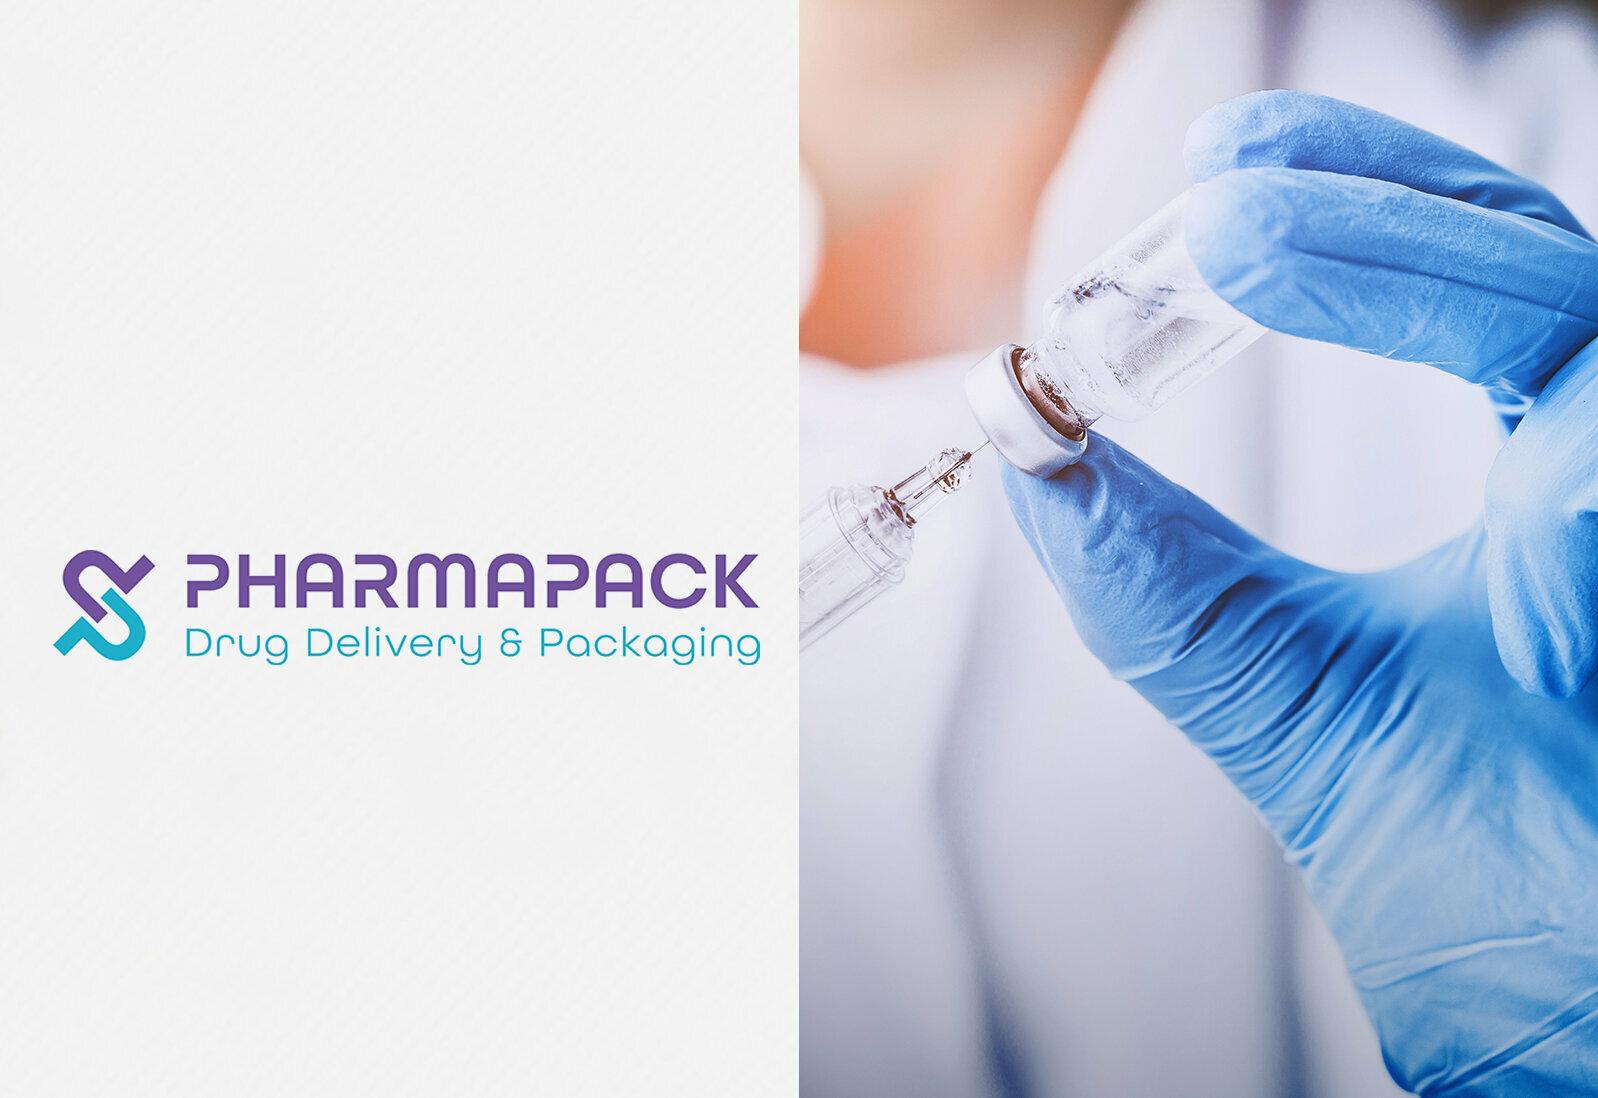 SÜDPACK MEDICA's exhibition at Pharmapack: Showcasing sustainable, PP-based solutions for blister packaging in Hall 7.2, Booth D84